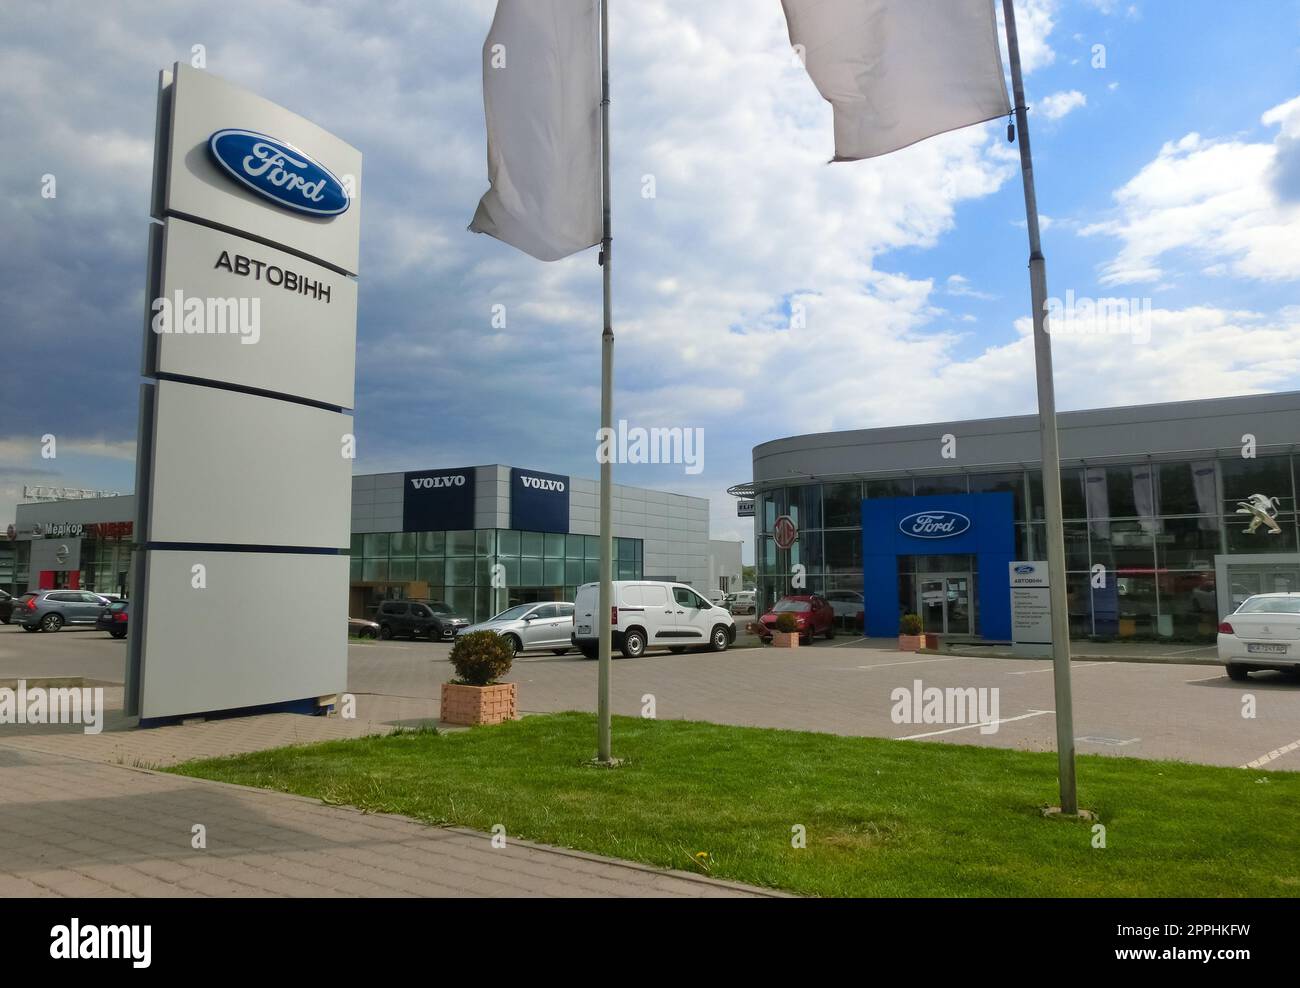 Ford store at Ternopol, Ukraine. The Ford Motor Company is an American multinational automaker founded by Henry Ford in 1903. Stock Photo